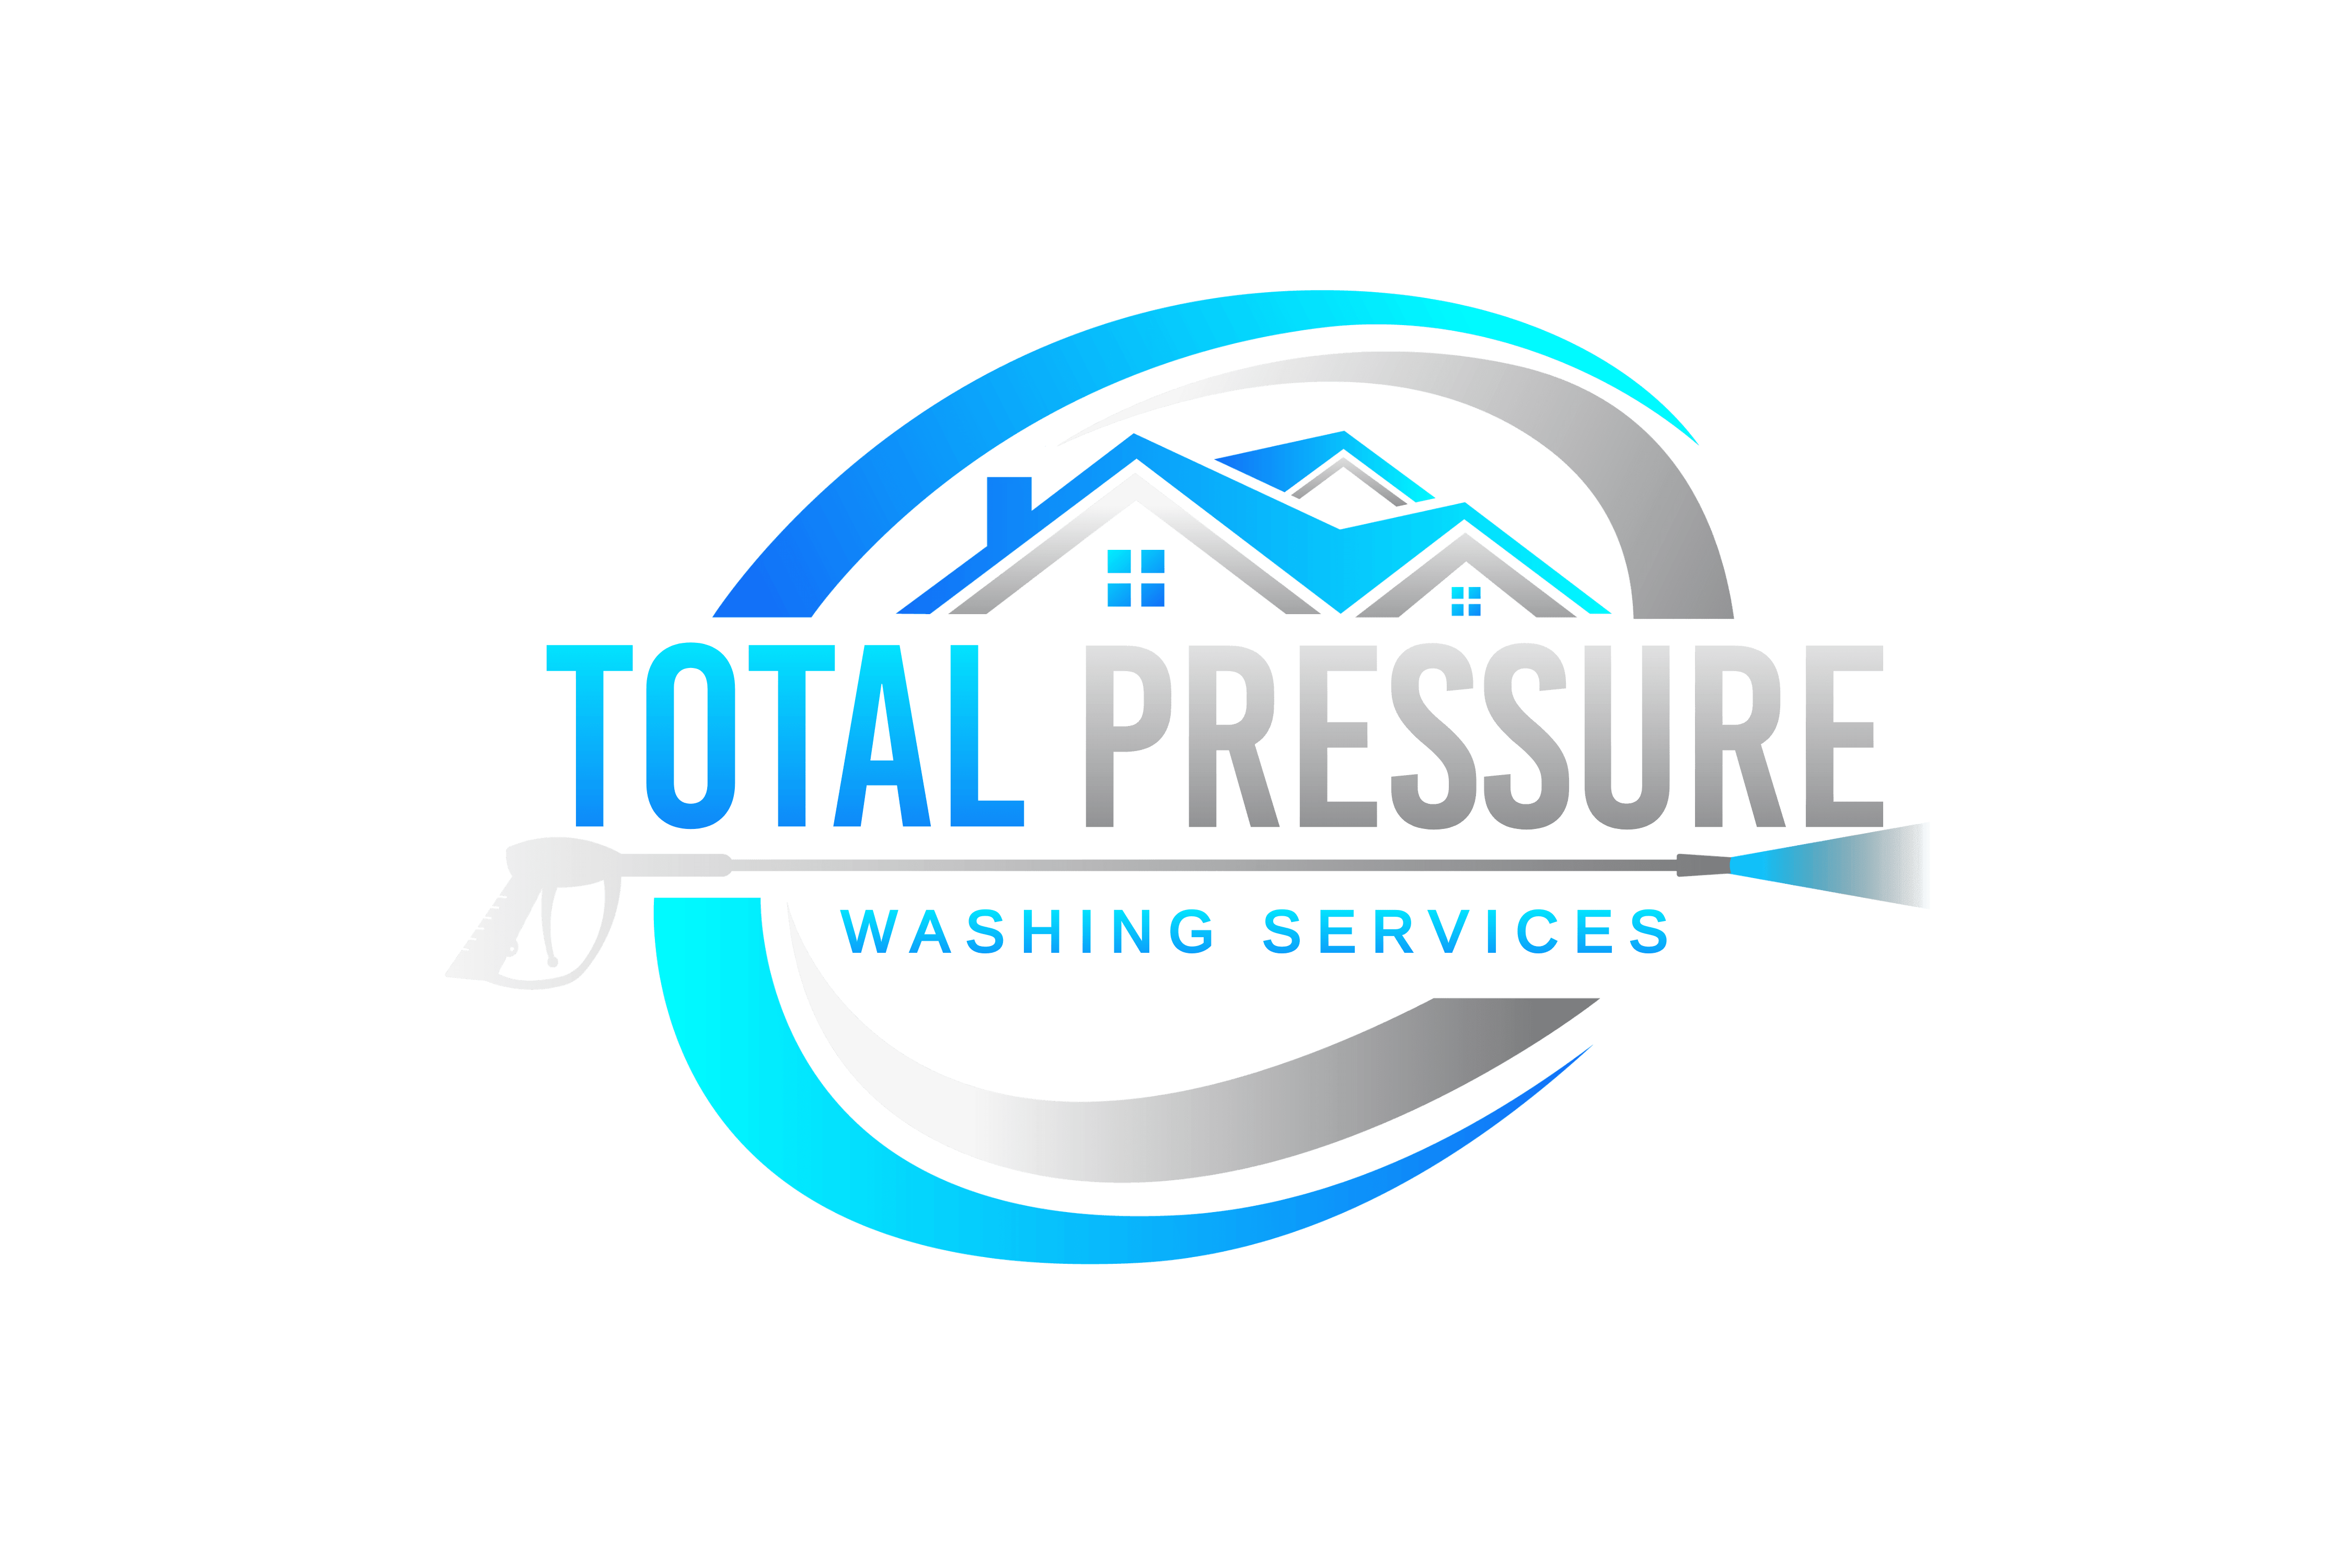 Total Pressure Washing Services